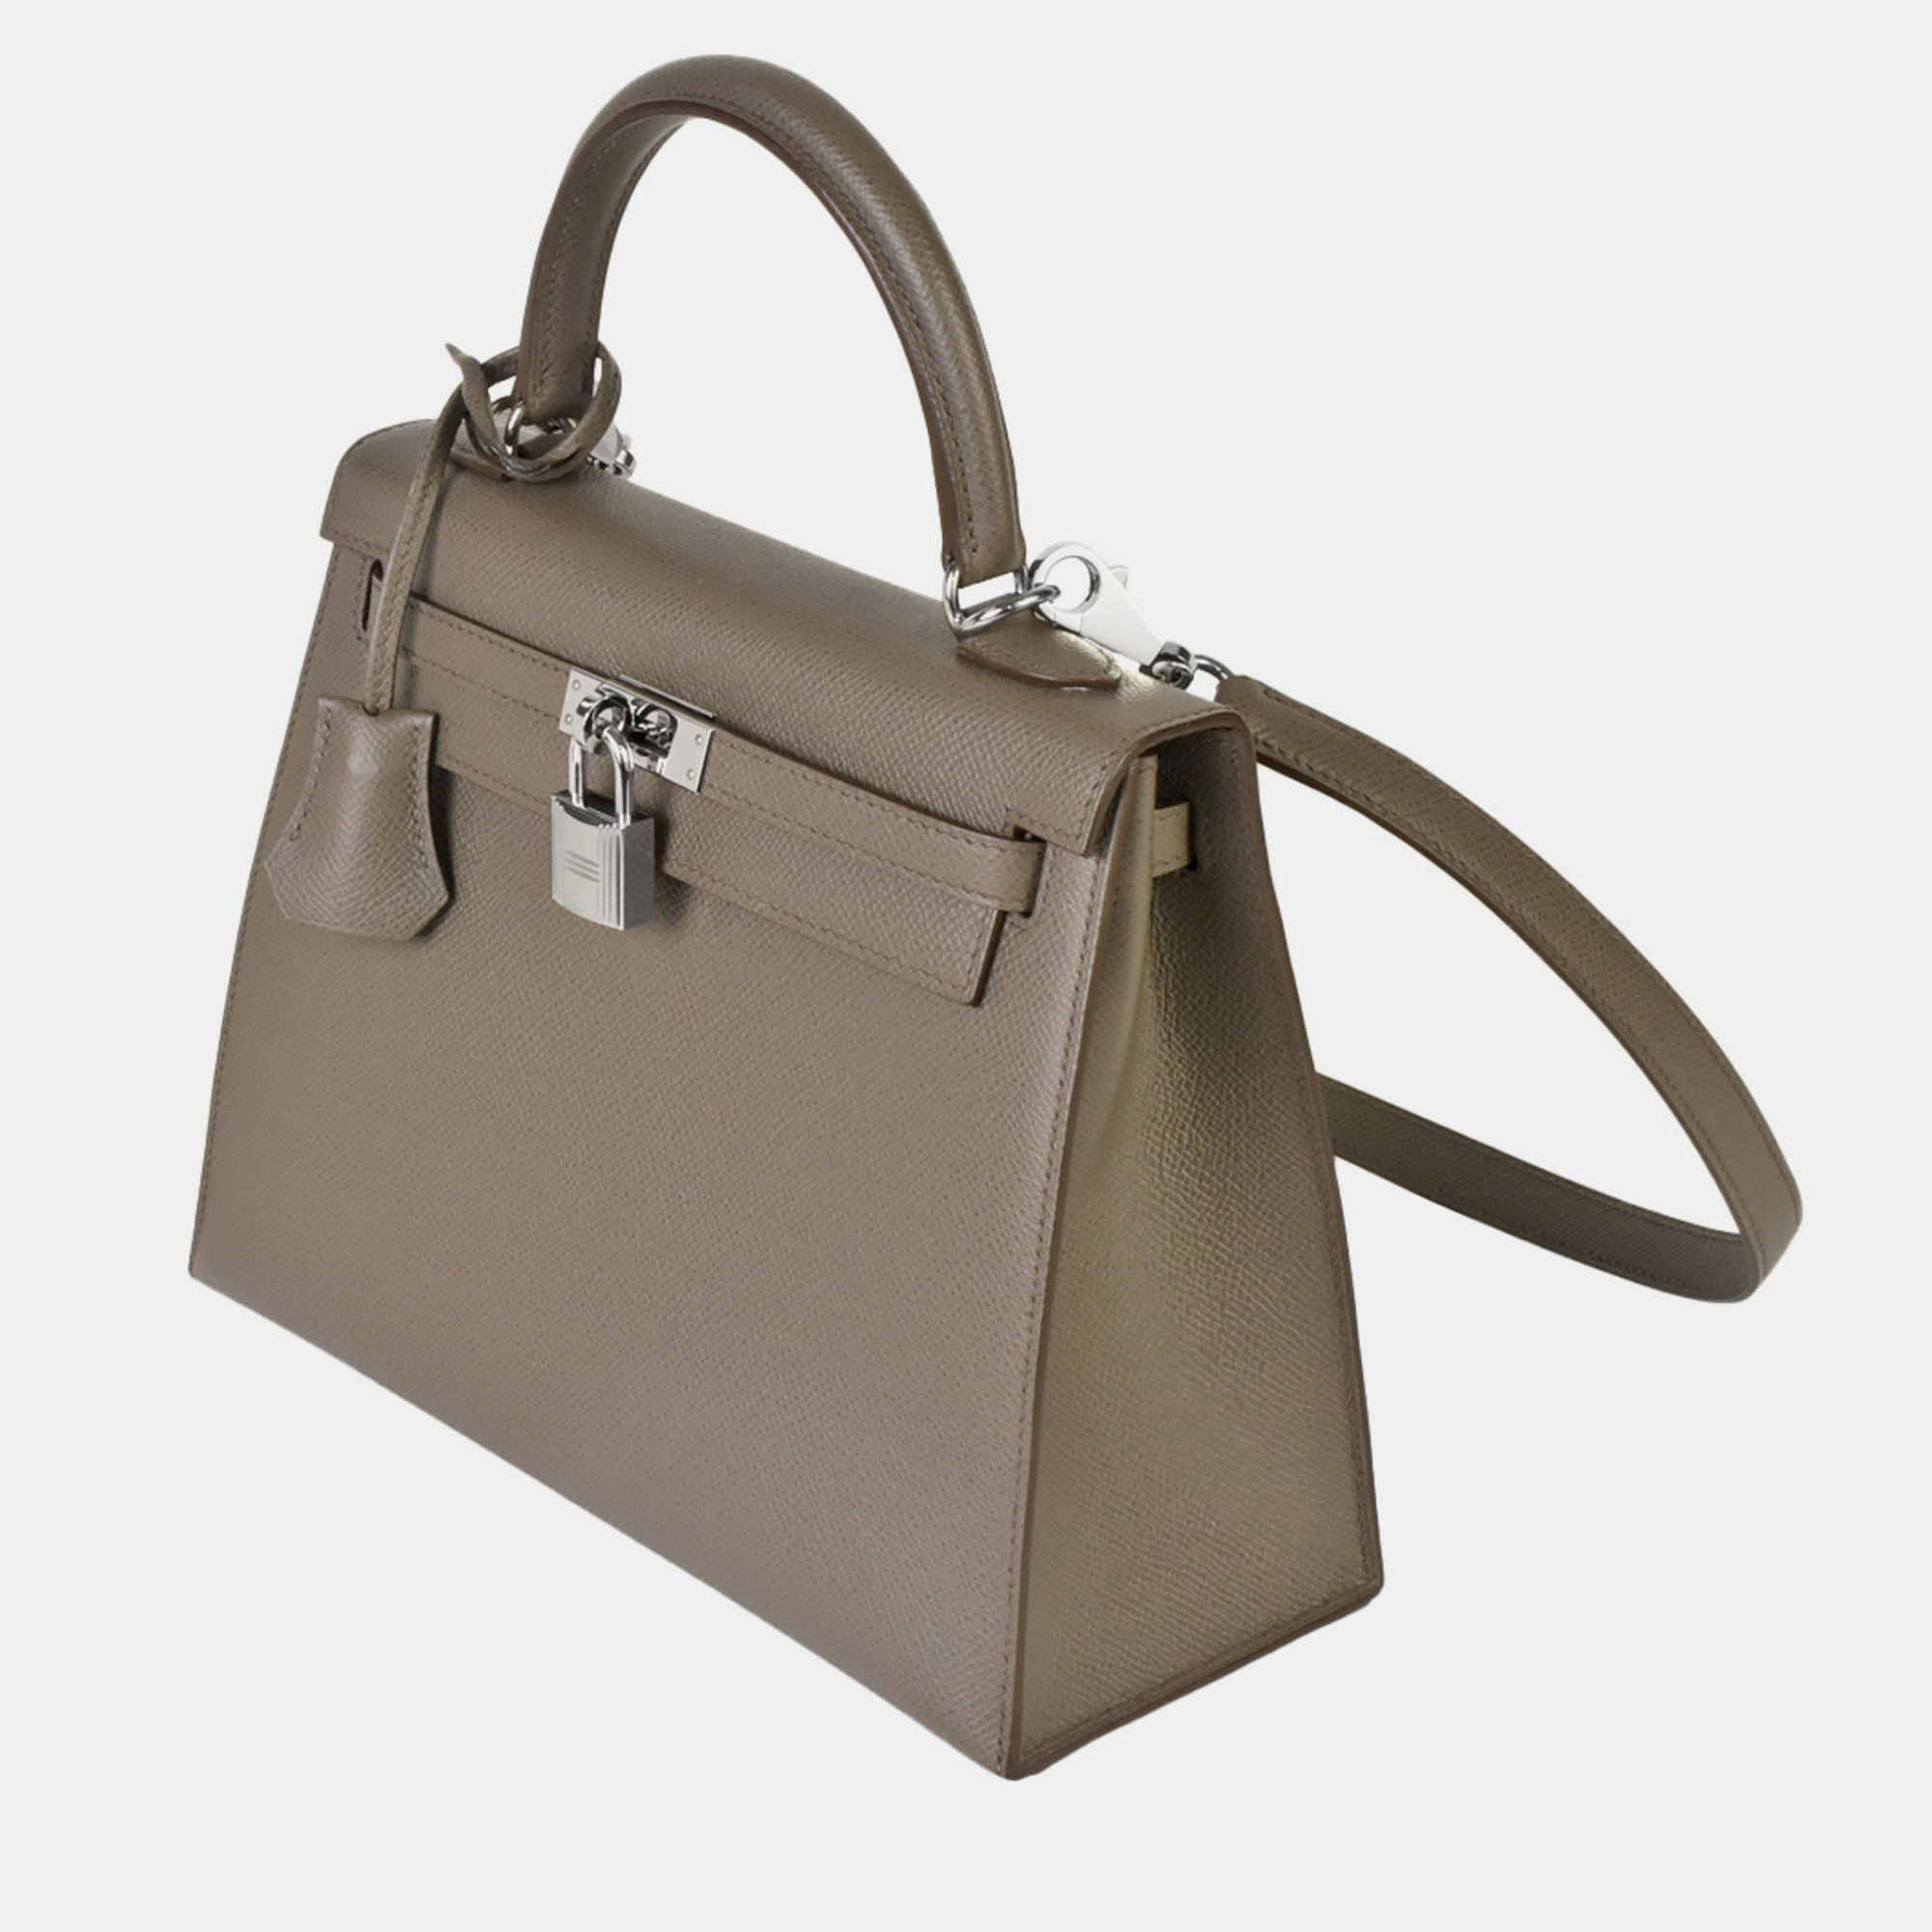 HERMES Kelly 25 Handbag With Outside Stitching Shoulder Strap Taupe Vaux Epson C Stamp (manufactured In 2018)